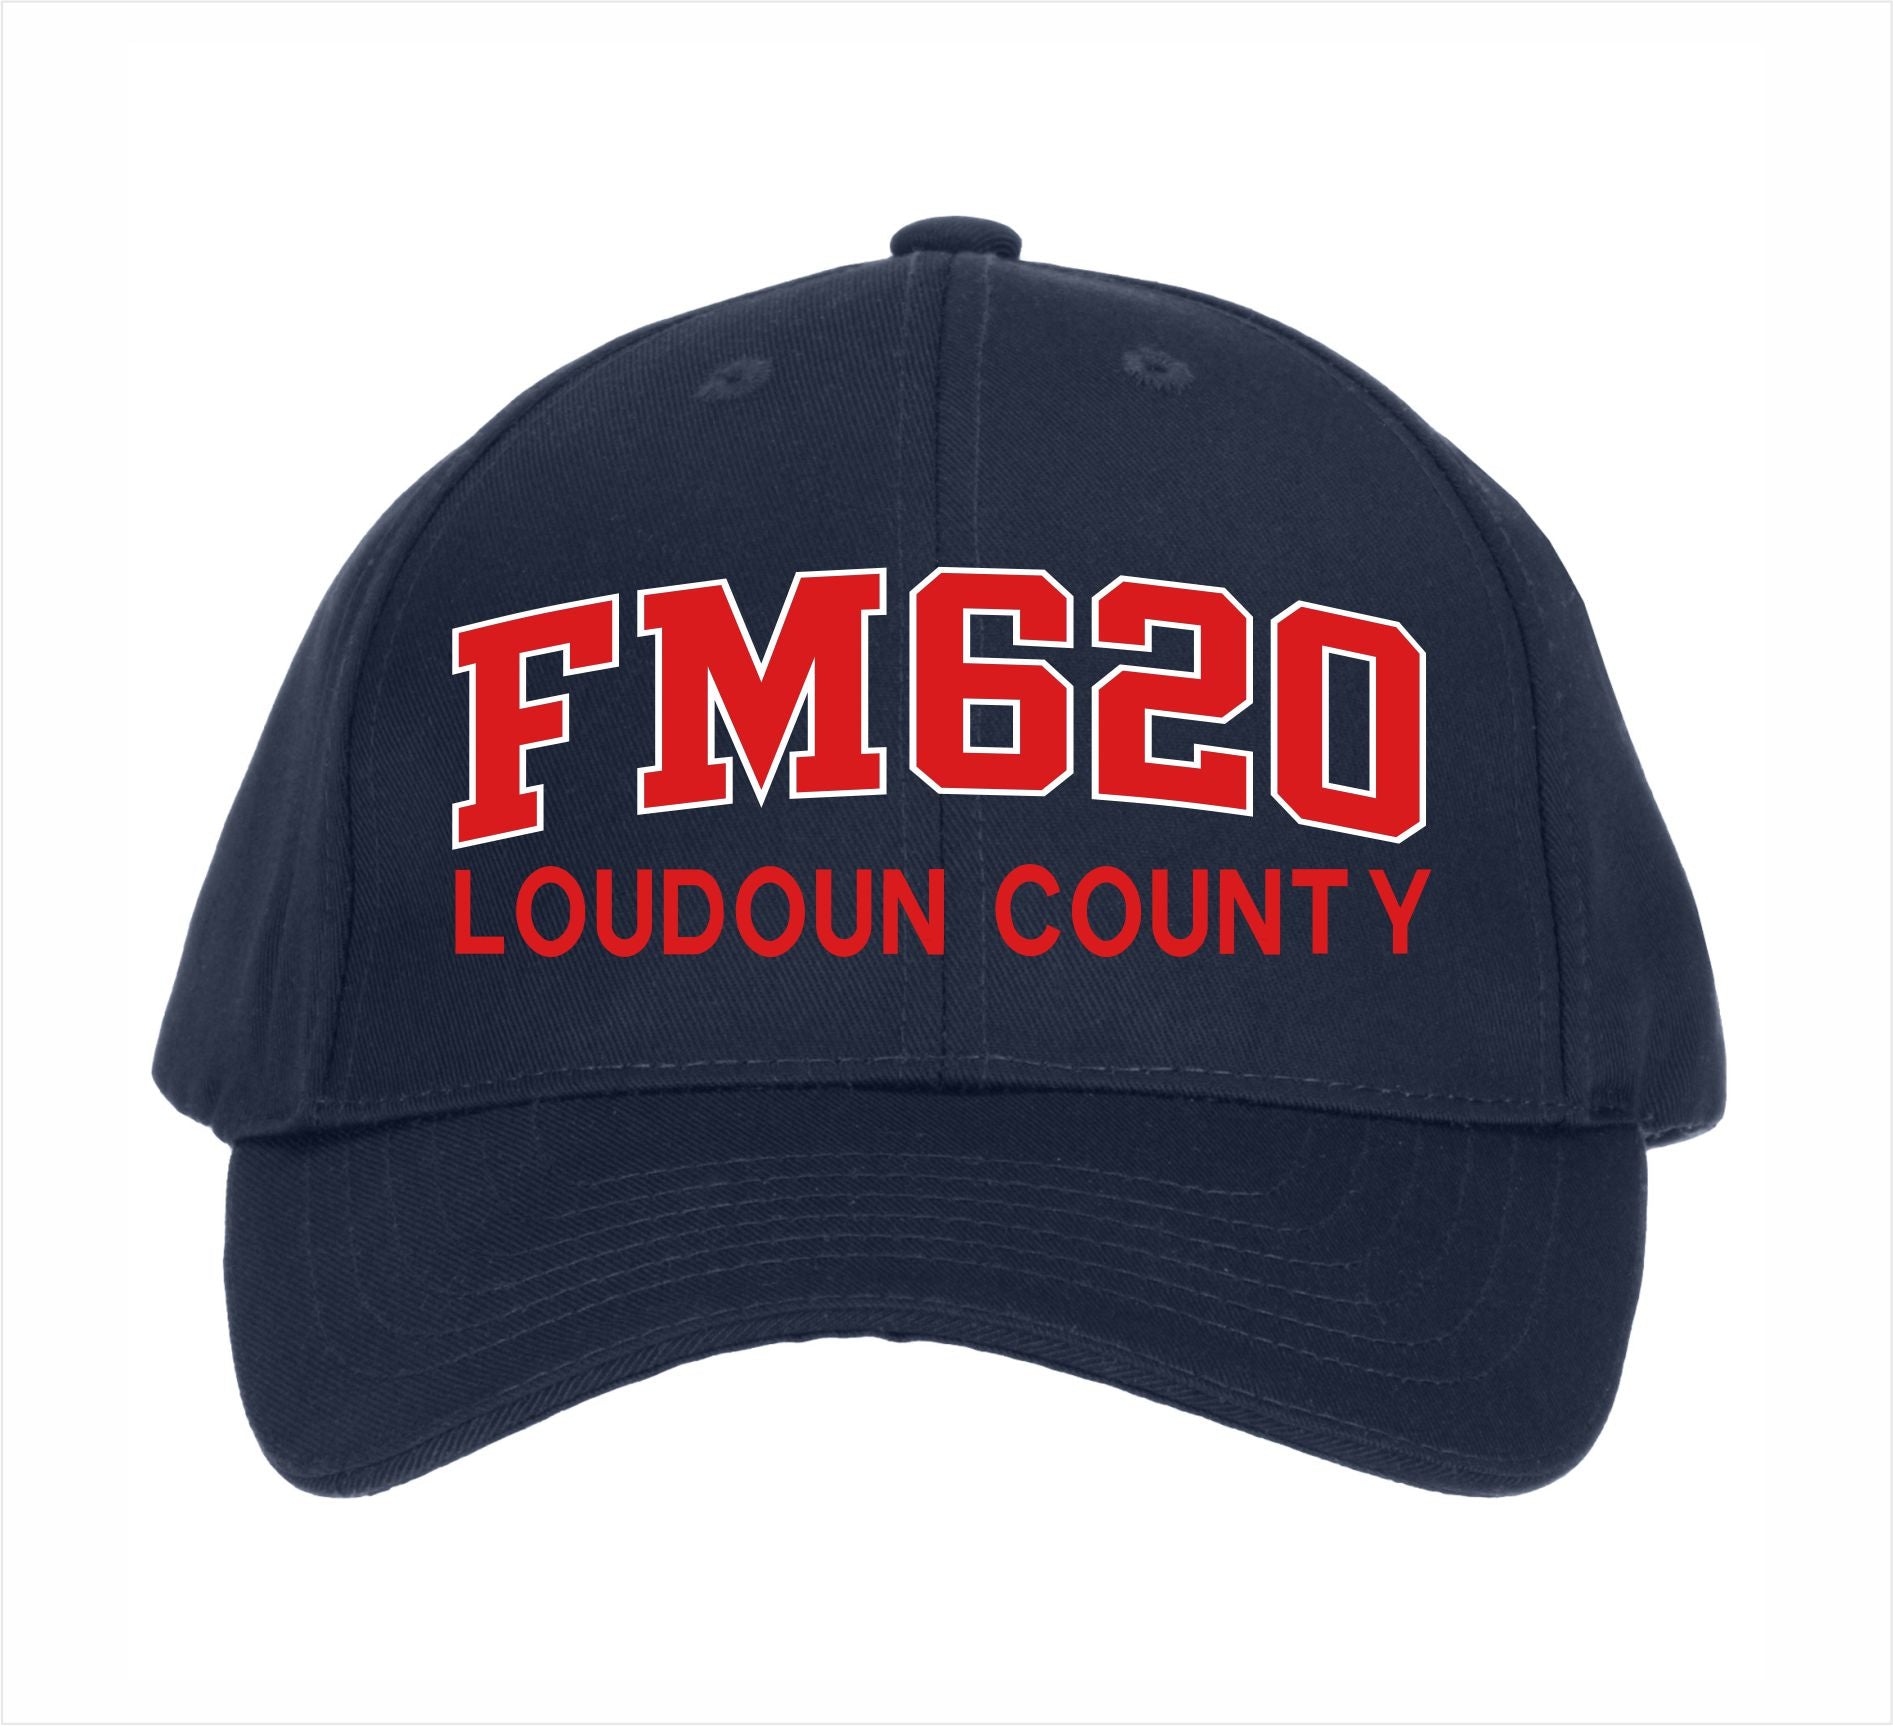 FM620 Loudoun County Embroidered Hat